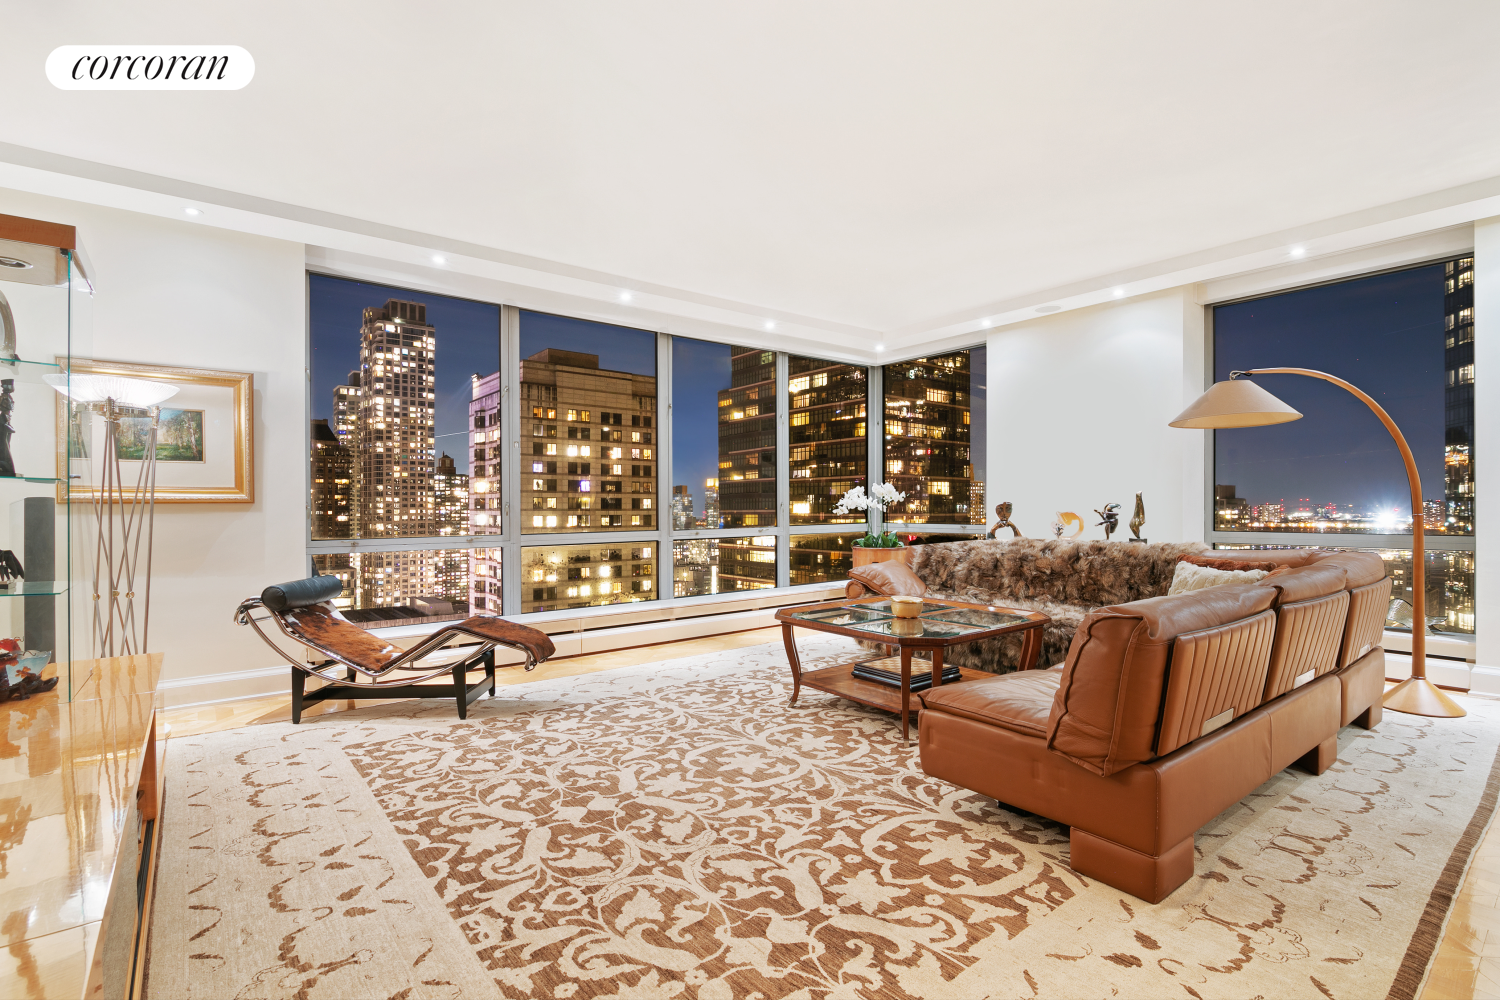 1965 Broadway 26Ef, Lincoln Sq, Upper West Side, NYC - 5 Bedrooms  
4.5 Bathrooms  
10 Rooms - 